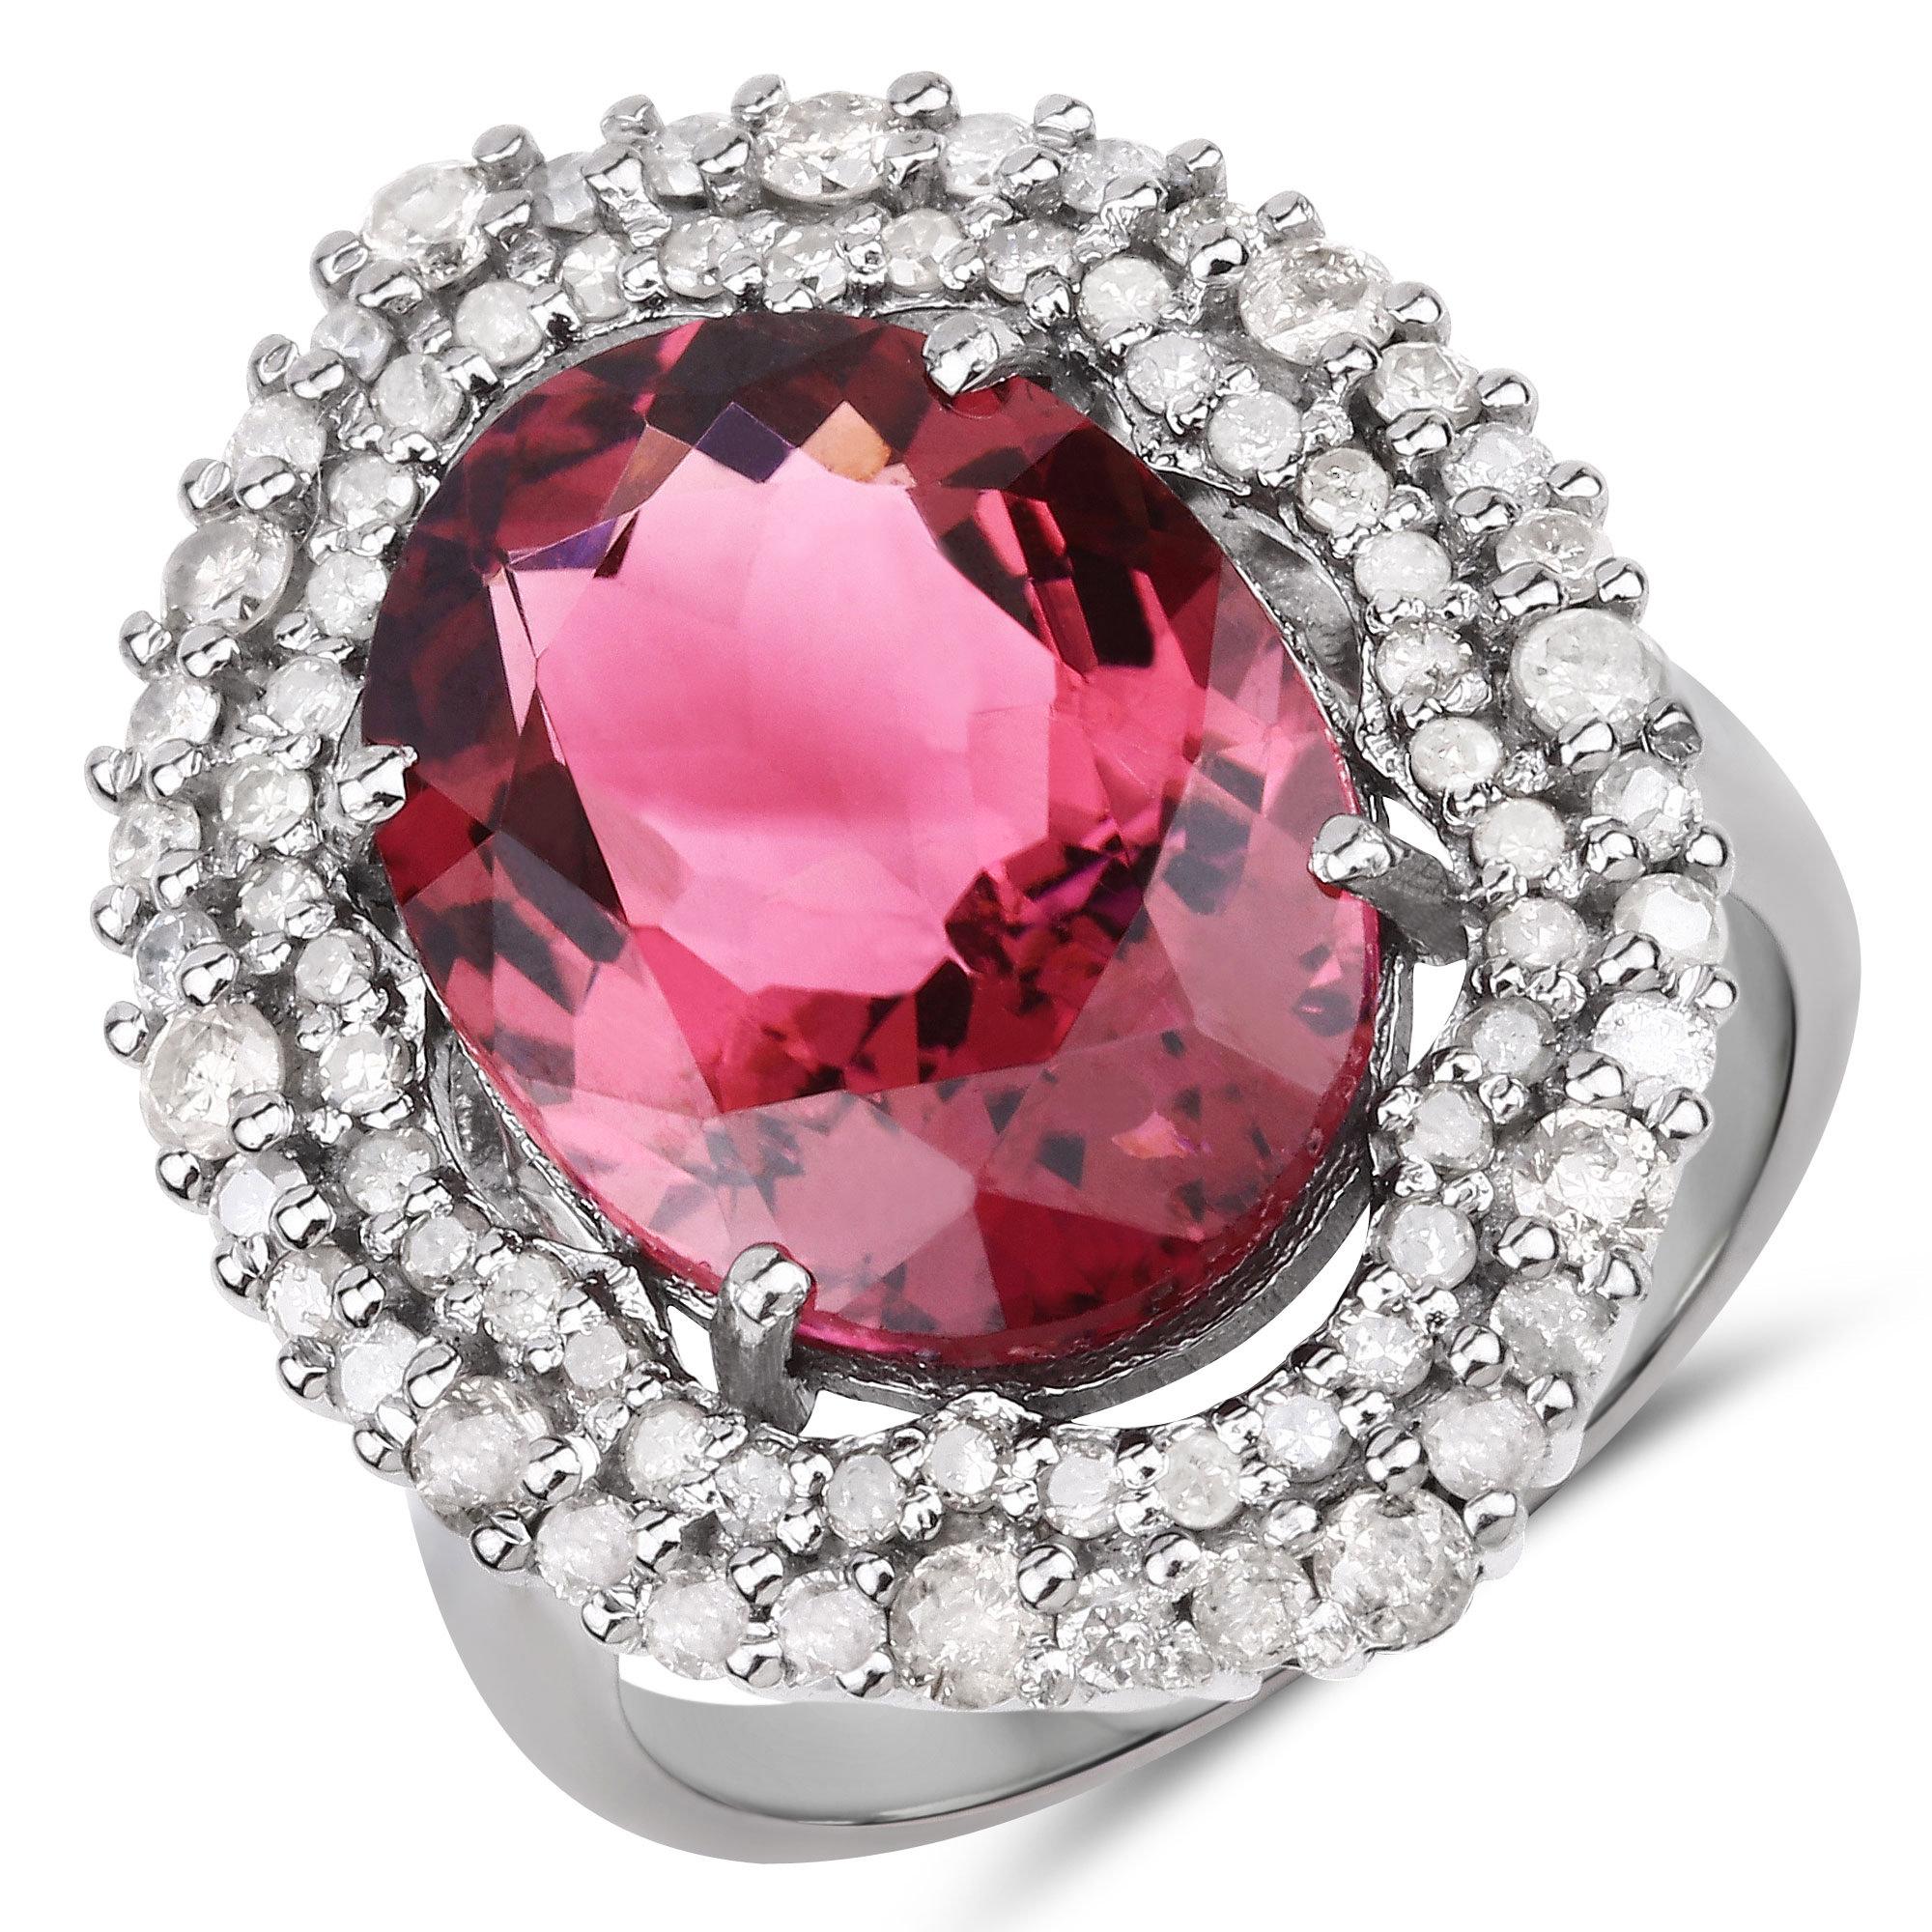 Contemporary Natural Pink Tourmaline Statement Ring With Diamonds 9 Carats Total